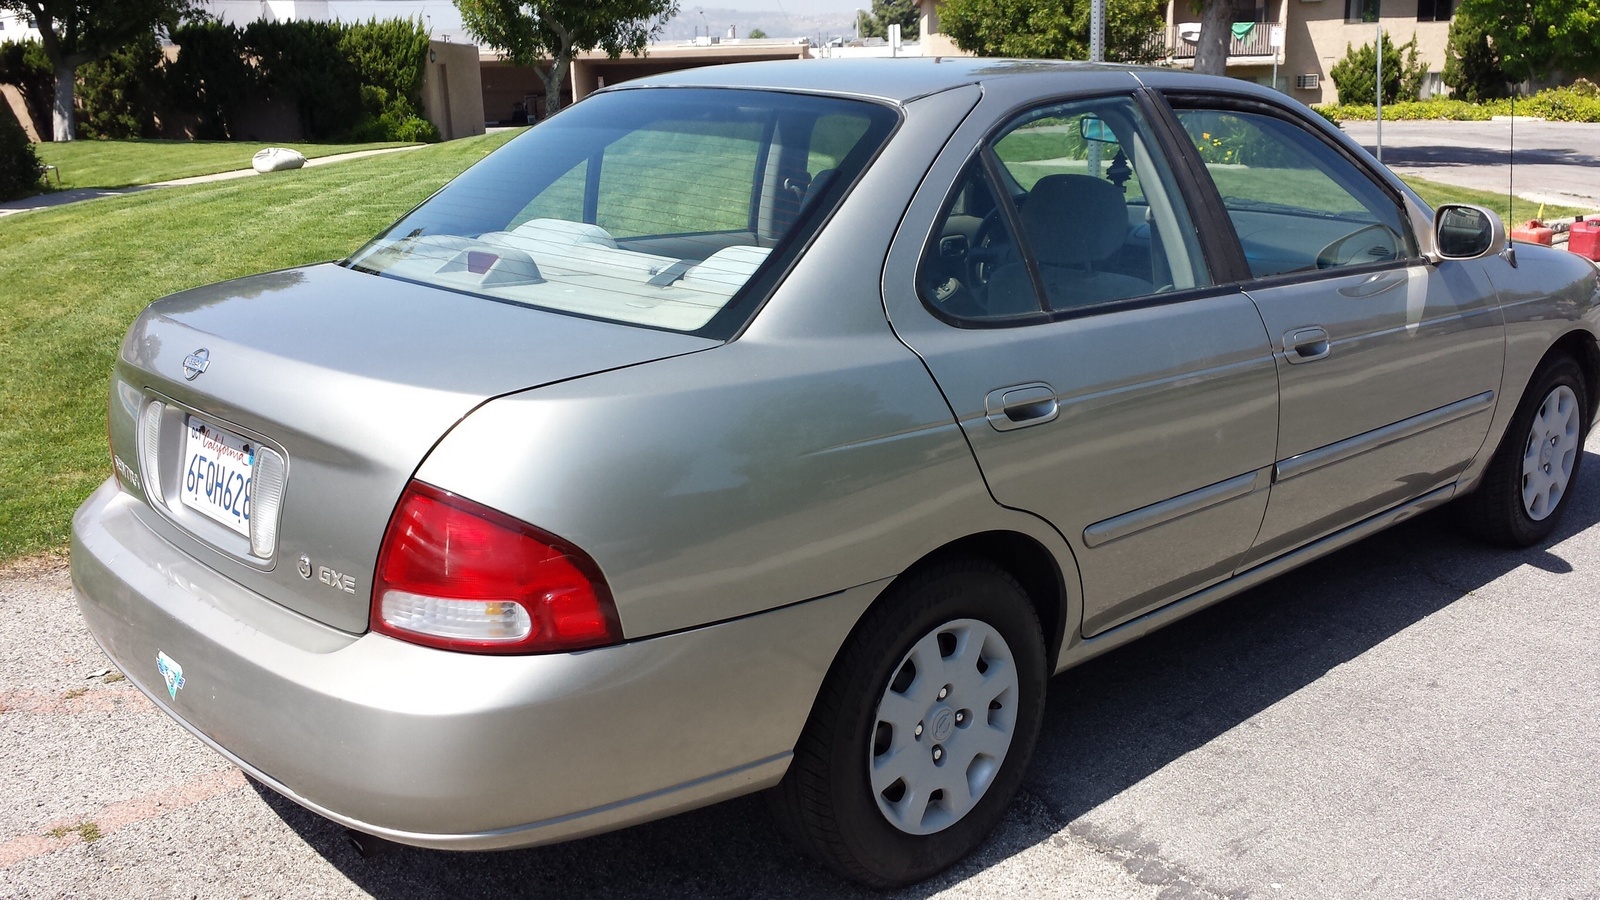 2001 Nissan sentra gxe specifications #1